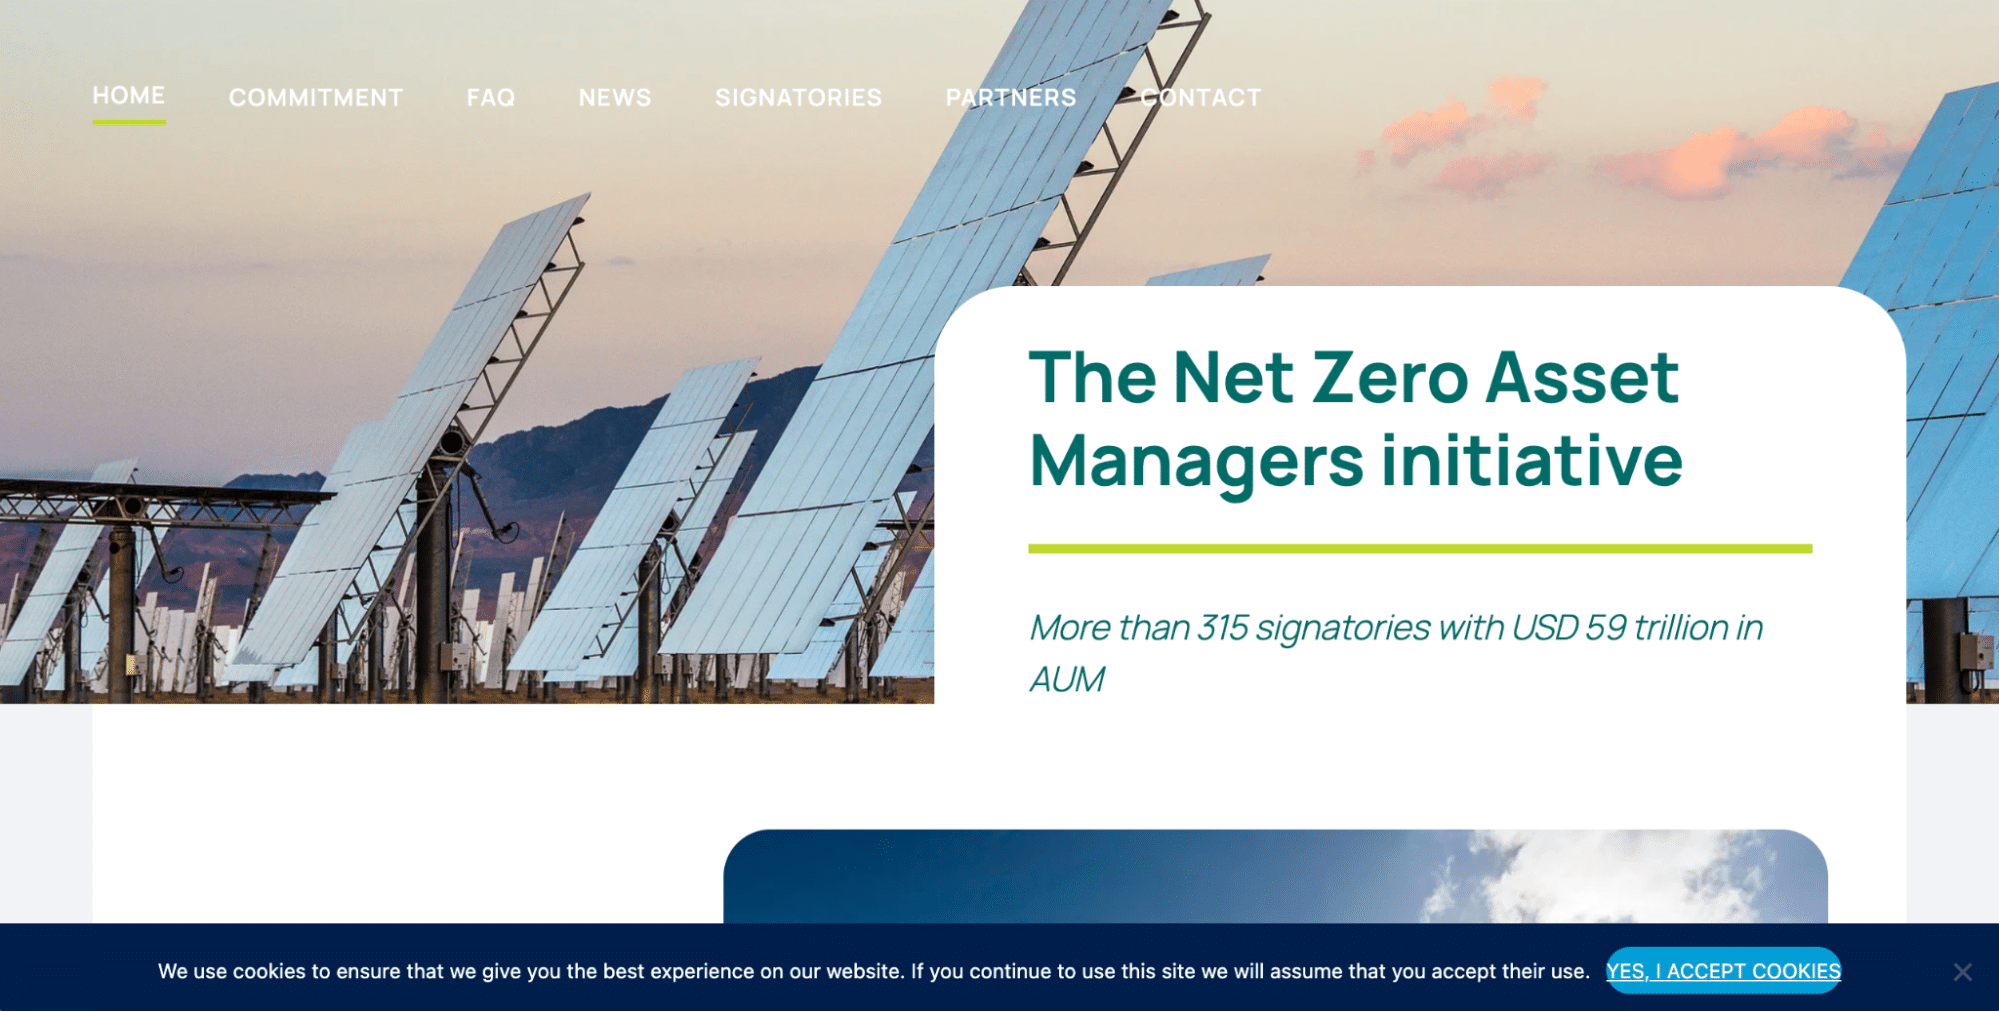 The Net Zero Asset Managers initiative